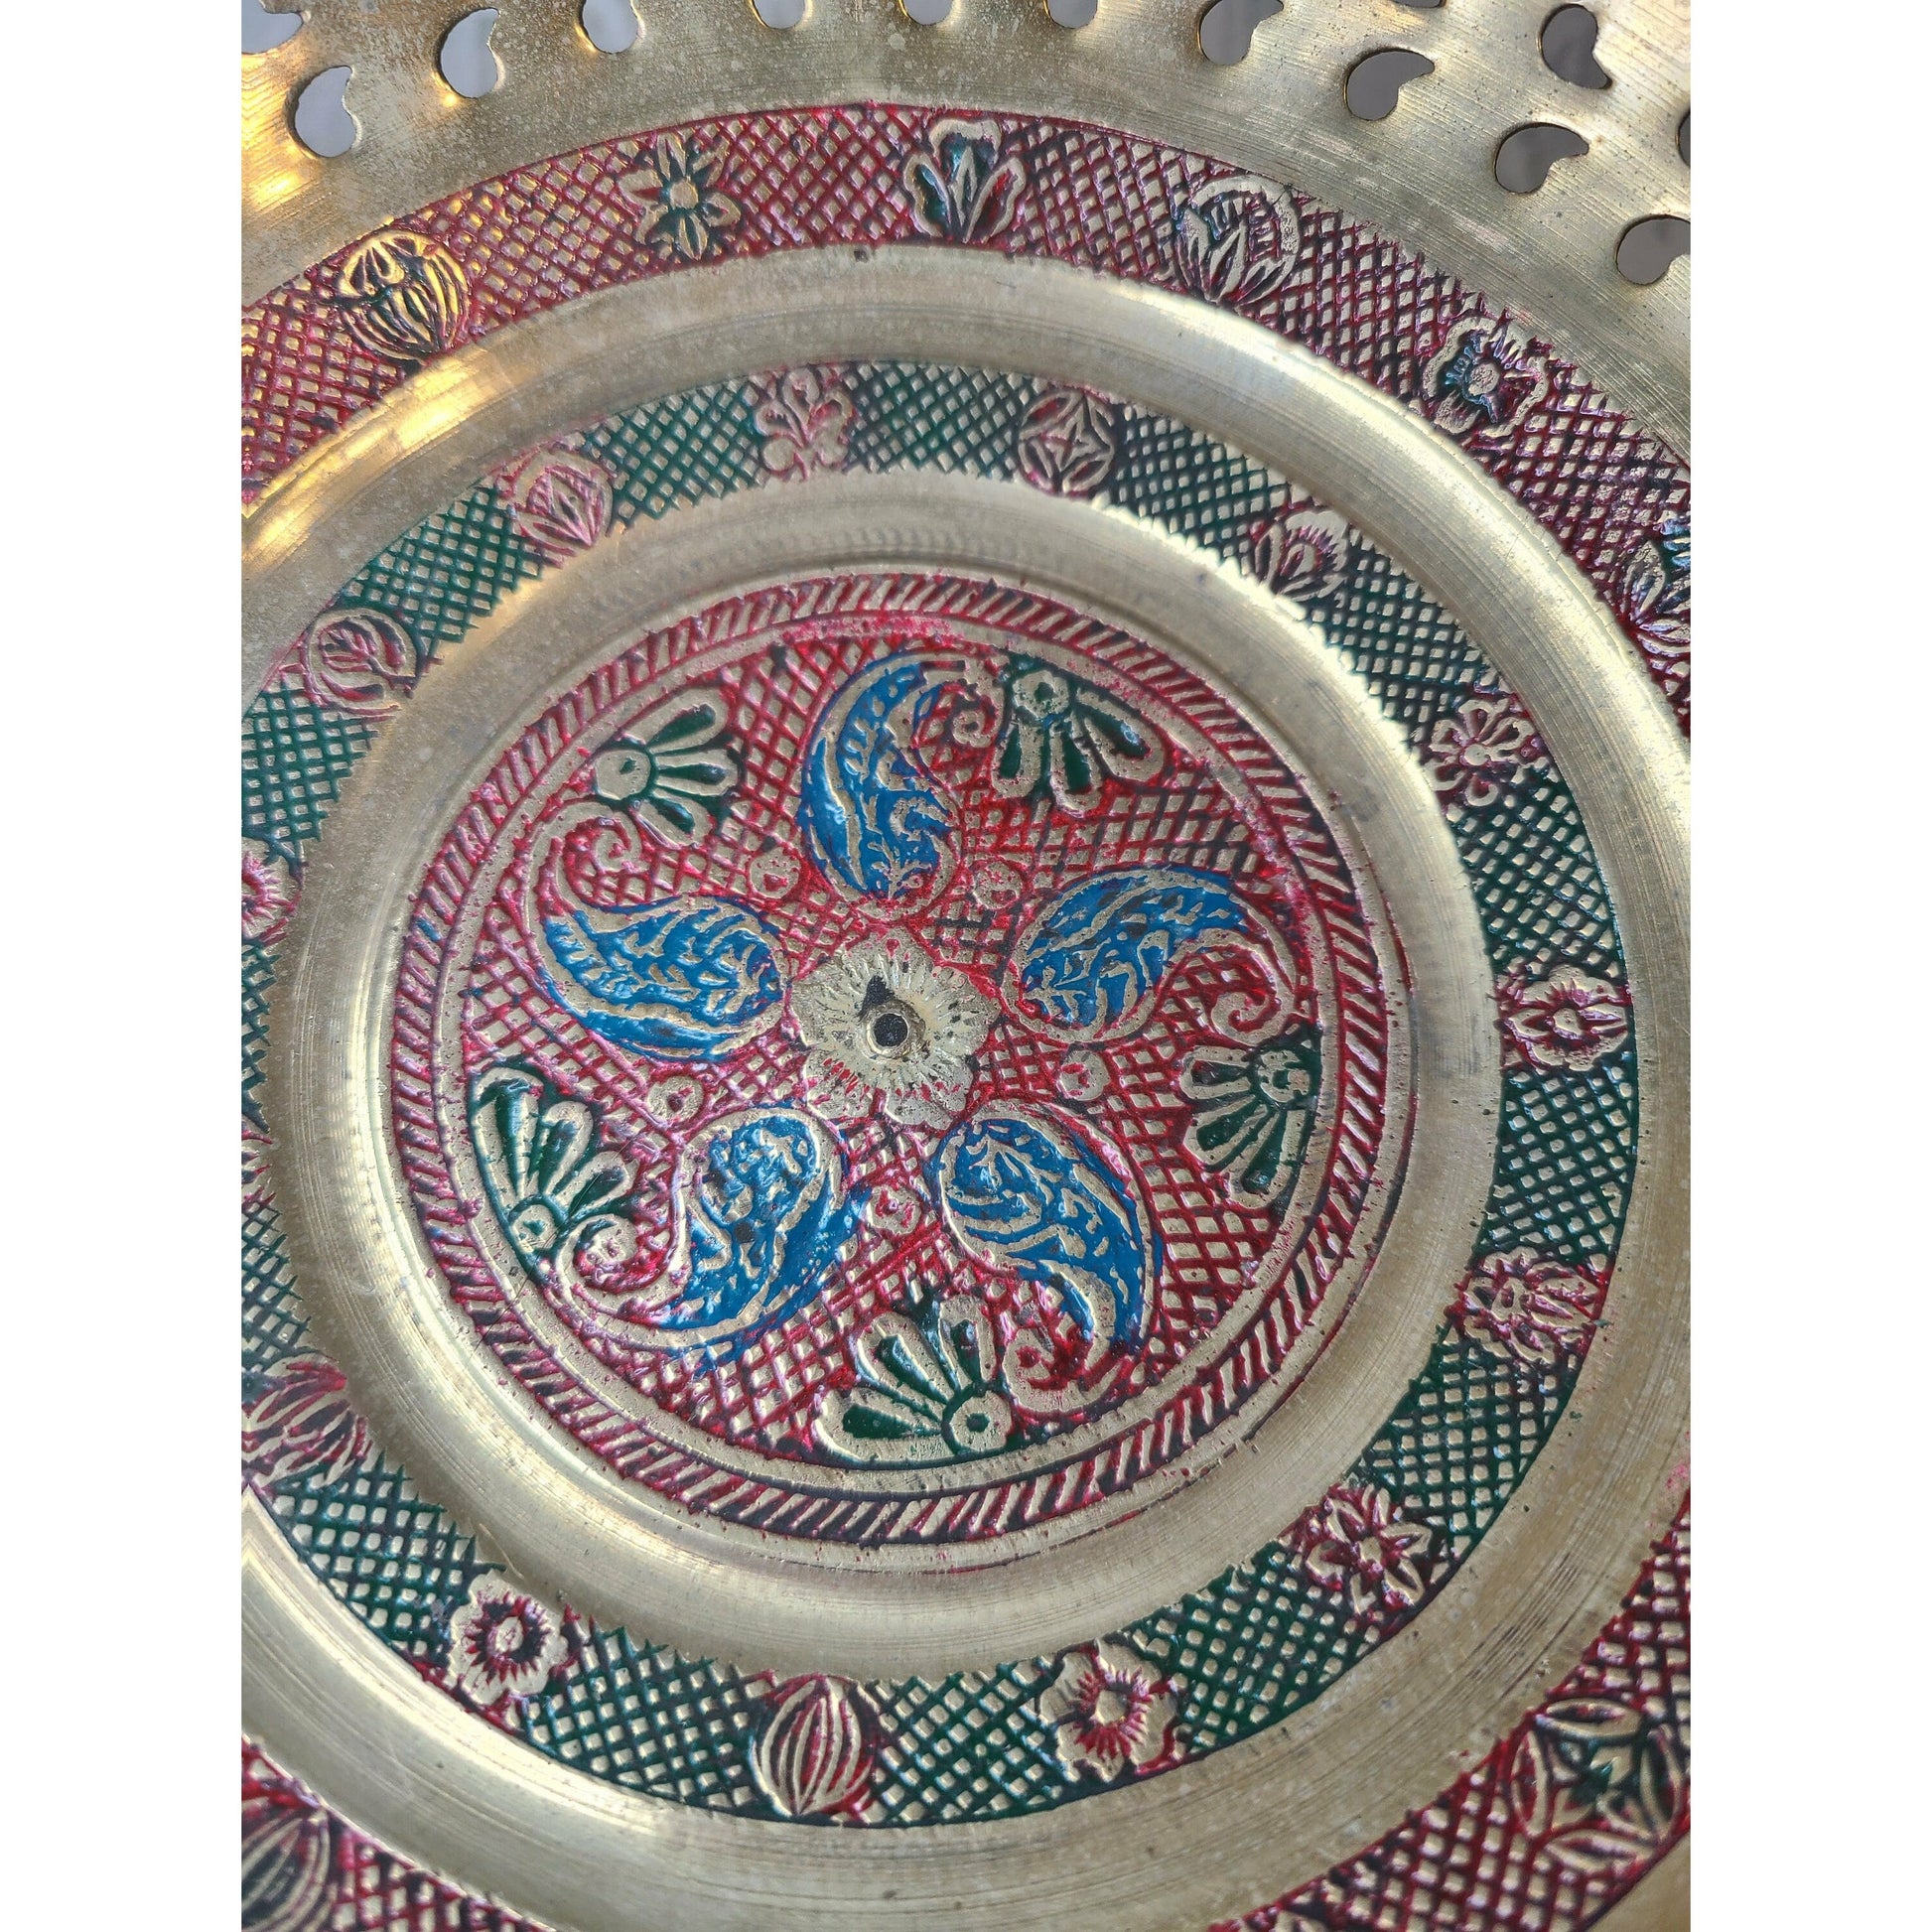 Antique India Brass Enamel Pedestal Plate Tray ~ For Altar or Crystal Display ~ 6.5" wide 3.9" Tall ~ Candies, Serving, or Display